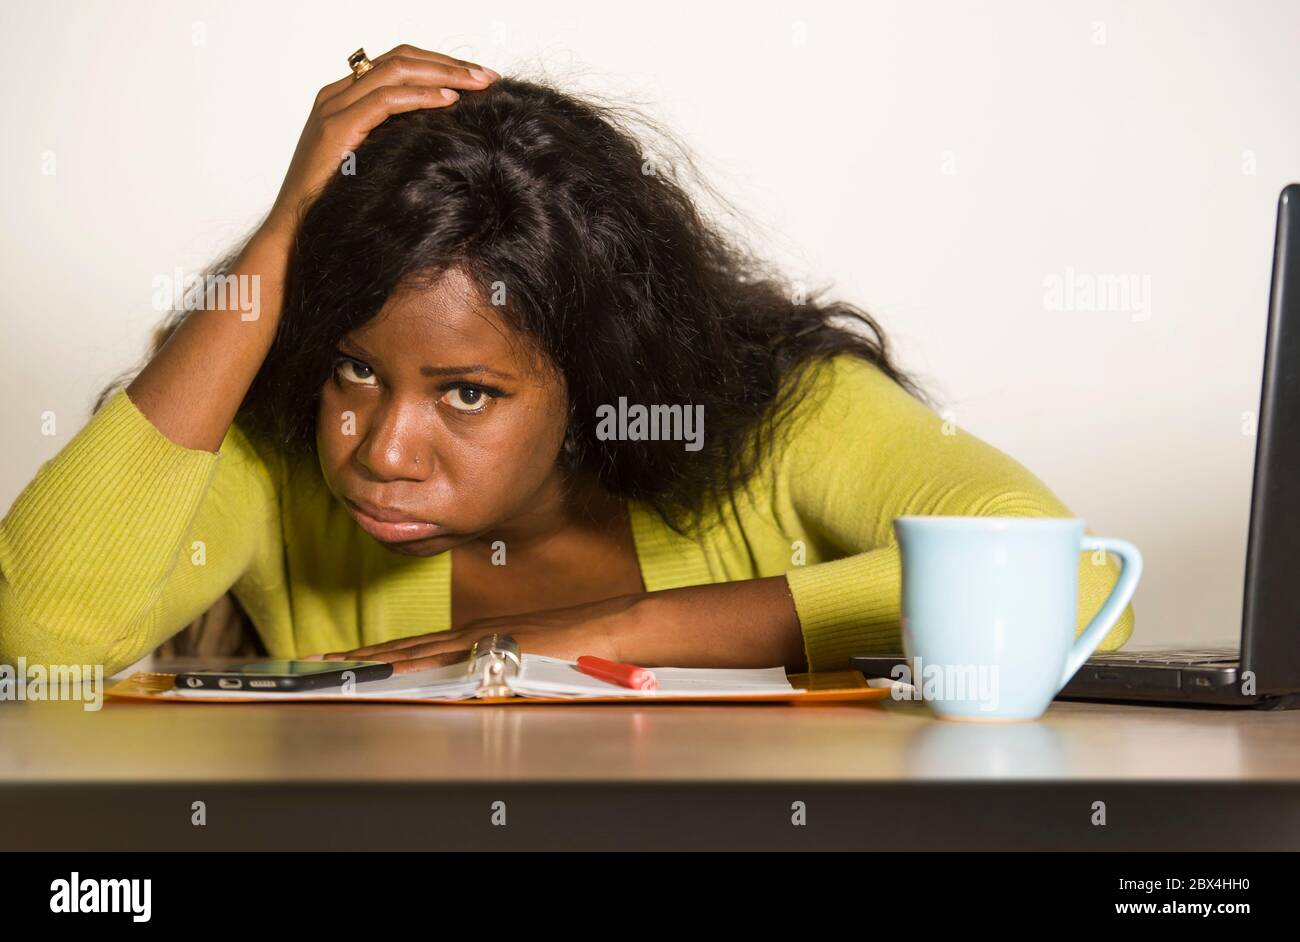 young attractive unhappy and exhausted black African American woman working lazy on Monday at office computer desk feeling overwhelmed bored and frust Stock Photo